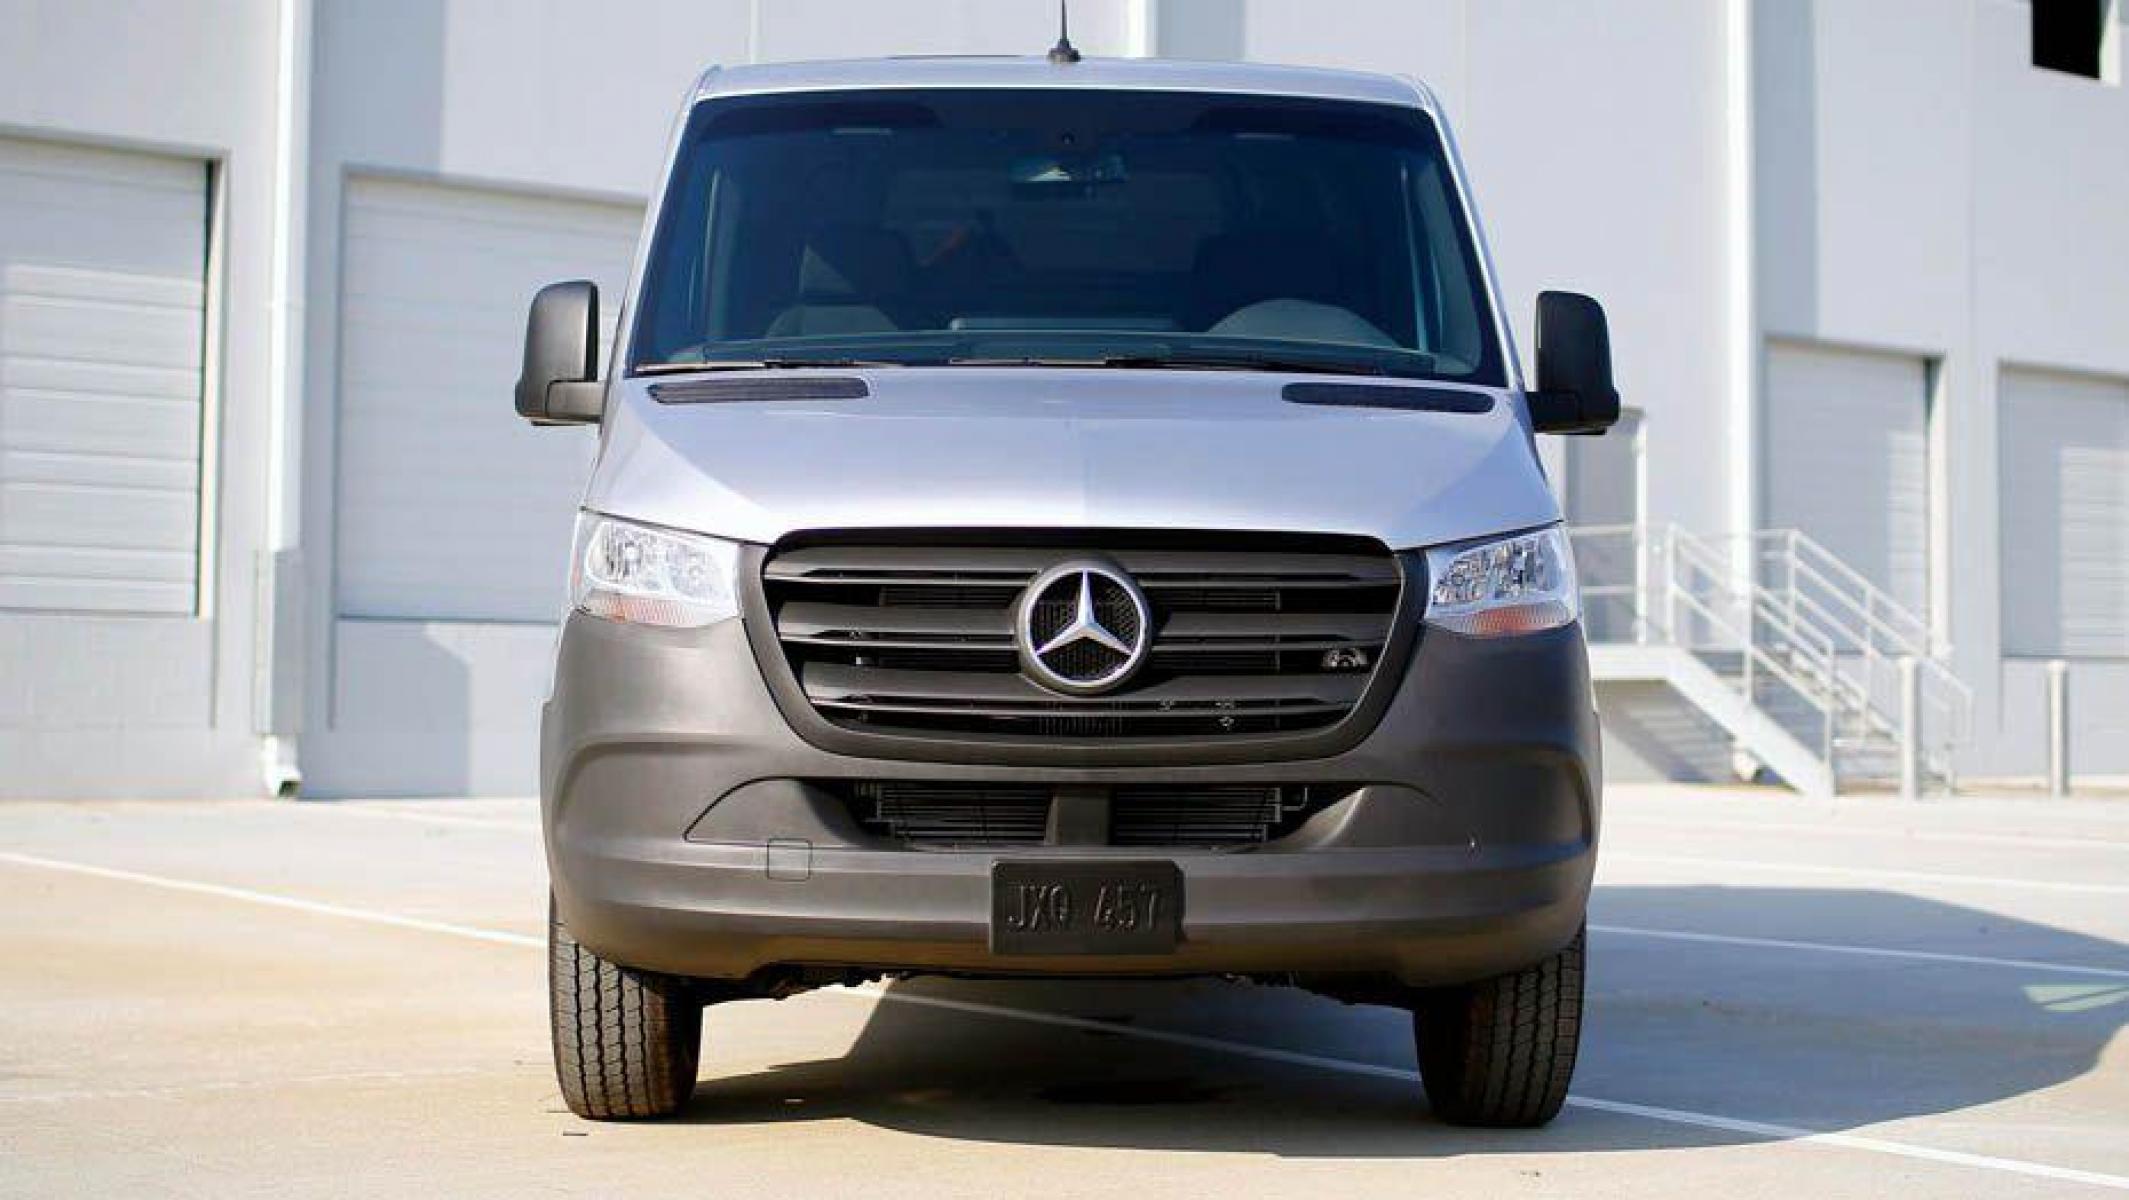 2021 IRIDIUM SILVER METALLIC /GRAY MERCEDES-BENZ SPRINTER CREW 2500 HIGH ROOF V6 144''WB, 4WD (W1W4EBVY9MT) with an 3.0L engine, Automatic transmission, located at 1505 S 356th St., Federal Way, WA, 98003, 47.282051, -122.314781 - THIS IS A HIGH ROOF MODEL!!!!!!! Standing height is 6'3'' inside. One Owner-CUSTOM BUILT FOR ONLY $89,999! You will not find a 4x4 TURBODIESEL V6, with a HIGH ROOF model like this with TOW and DRIVER ASSIST PACKAGES. Customization includes: Parking Package with 360 SURROUND-VIEW CAMER - Photo #2